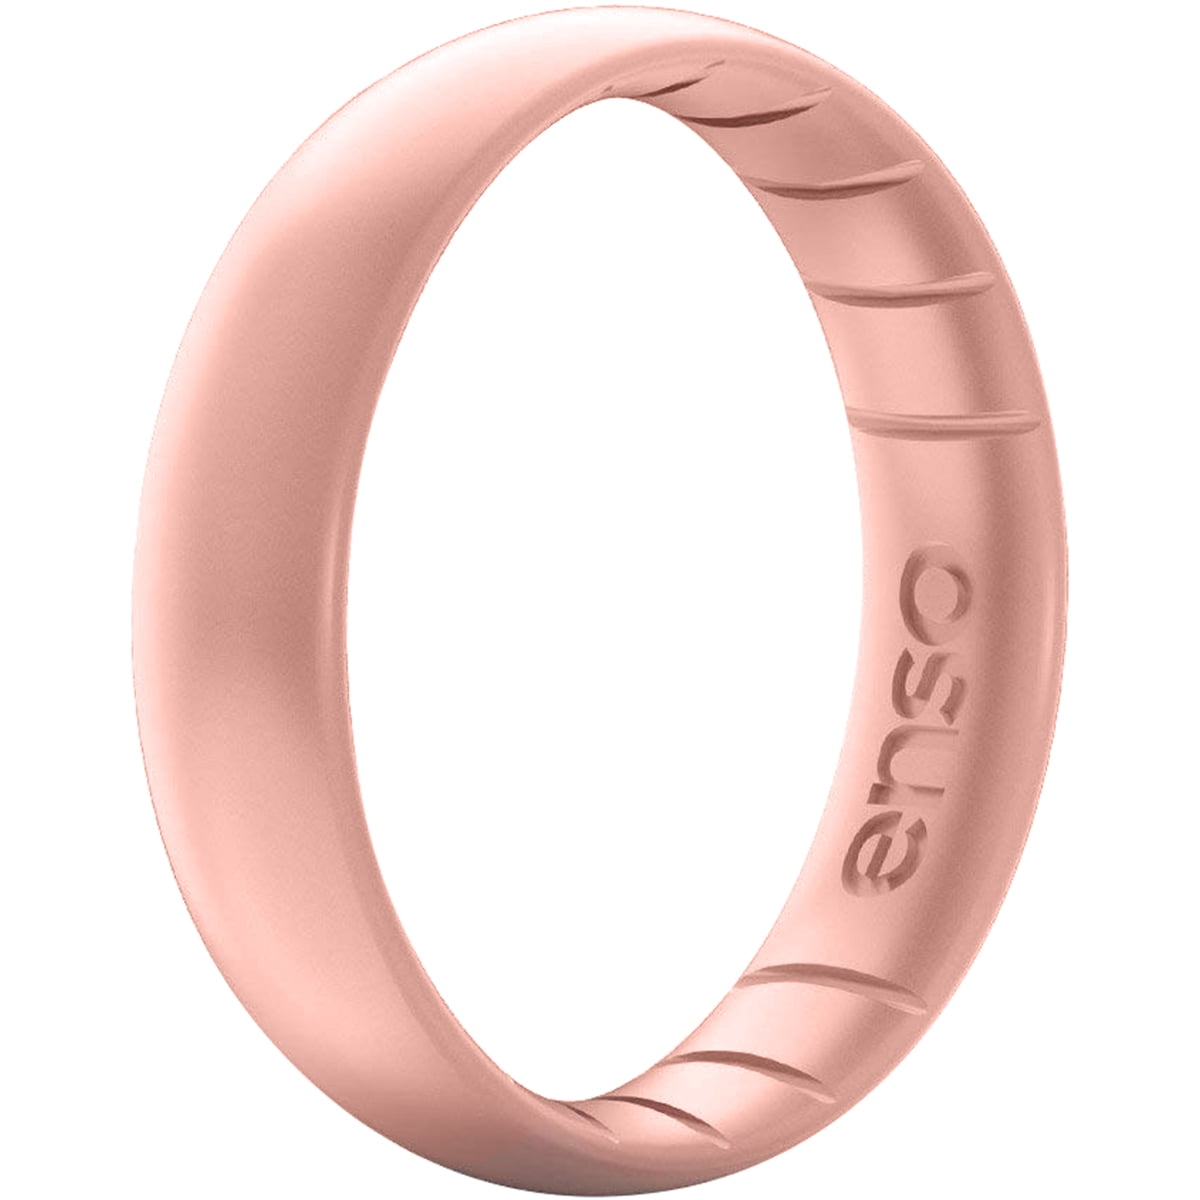 Wholesale 5.7mm Women Silicone Wedding band Couple Comfortable Metallic  Silicone Finger Rings Silicone Rings From m.